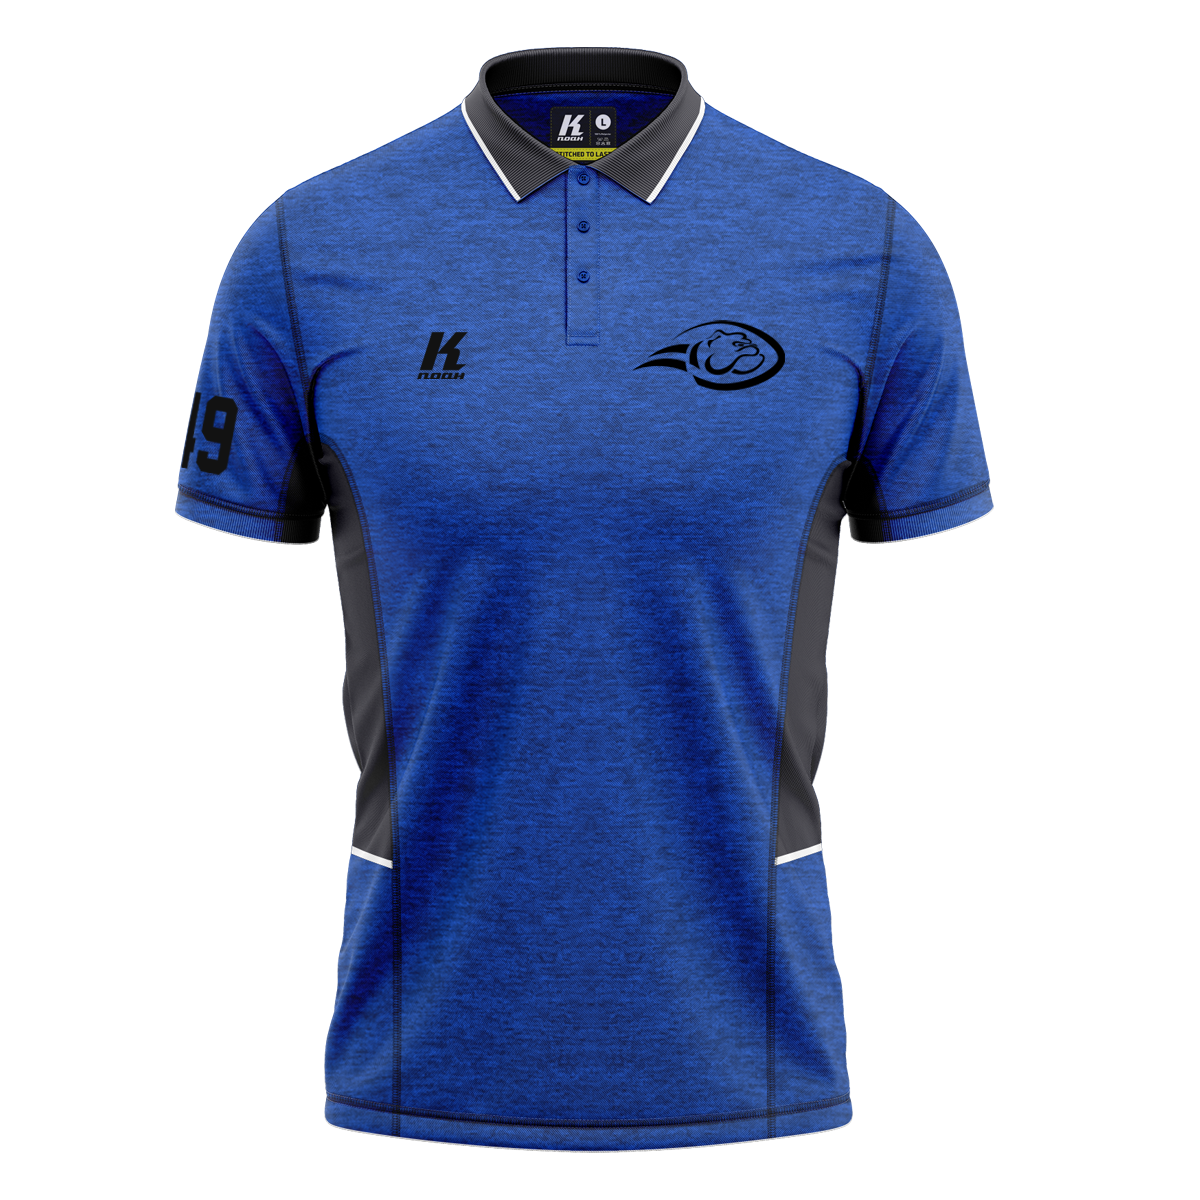 Wilddogs K.Tech-Fiber Polo “Grindle” with Playernumber/Initials